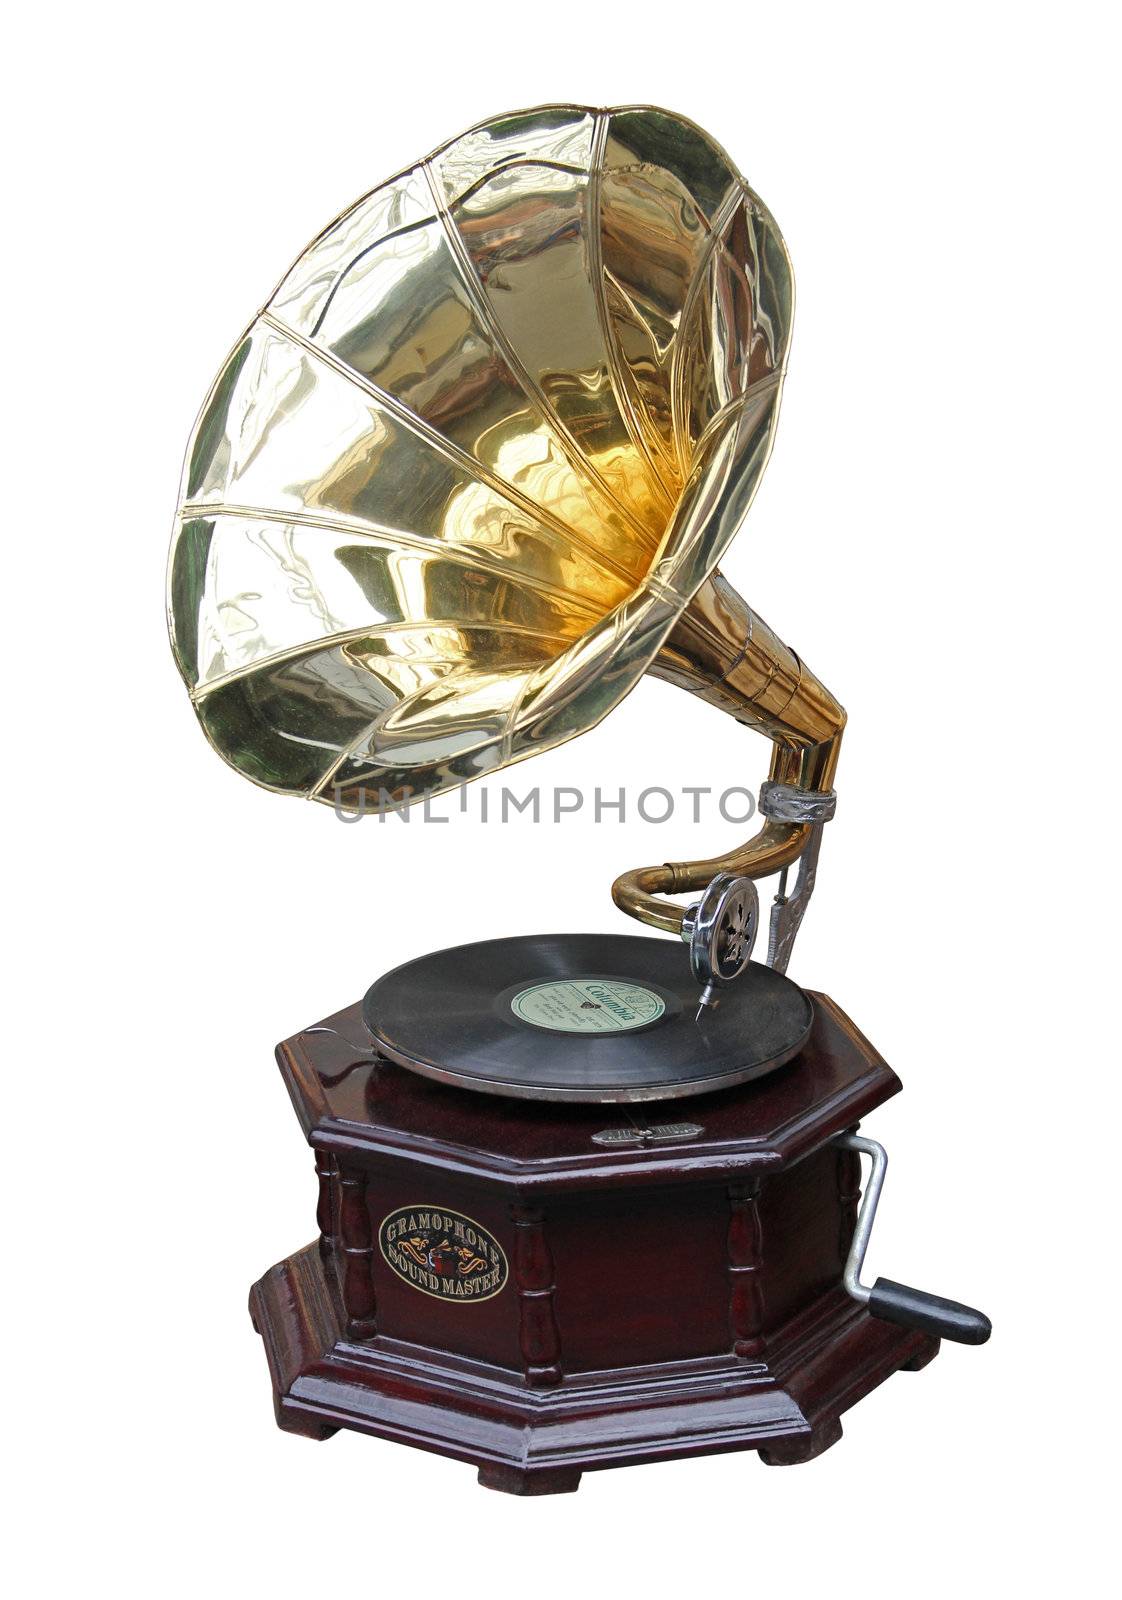 An old brass horn gramophone and record.